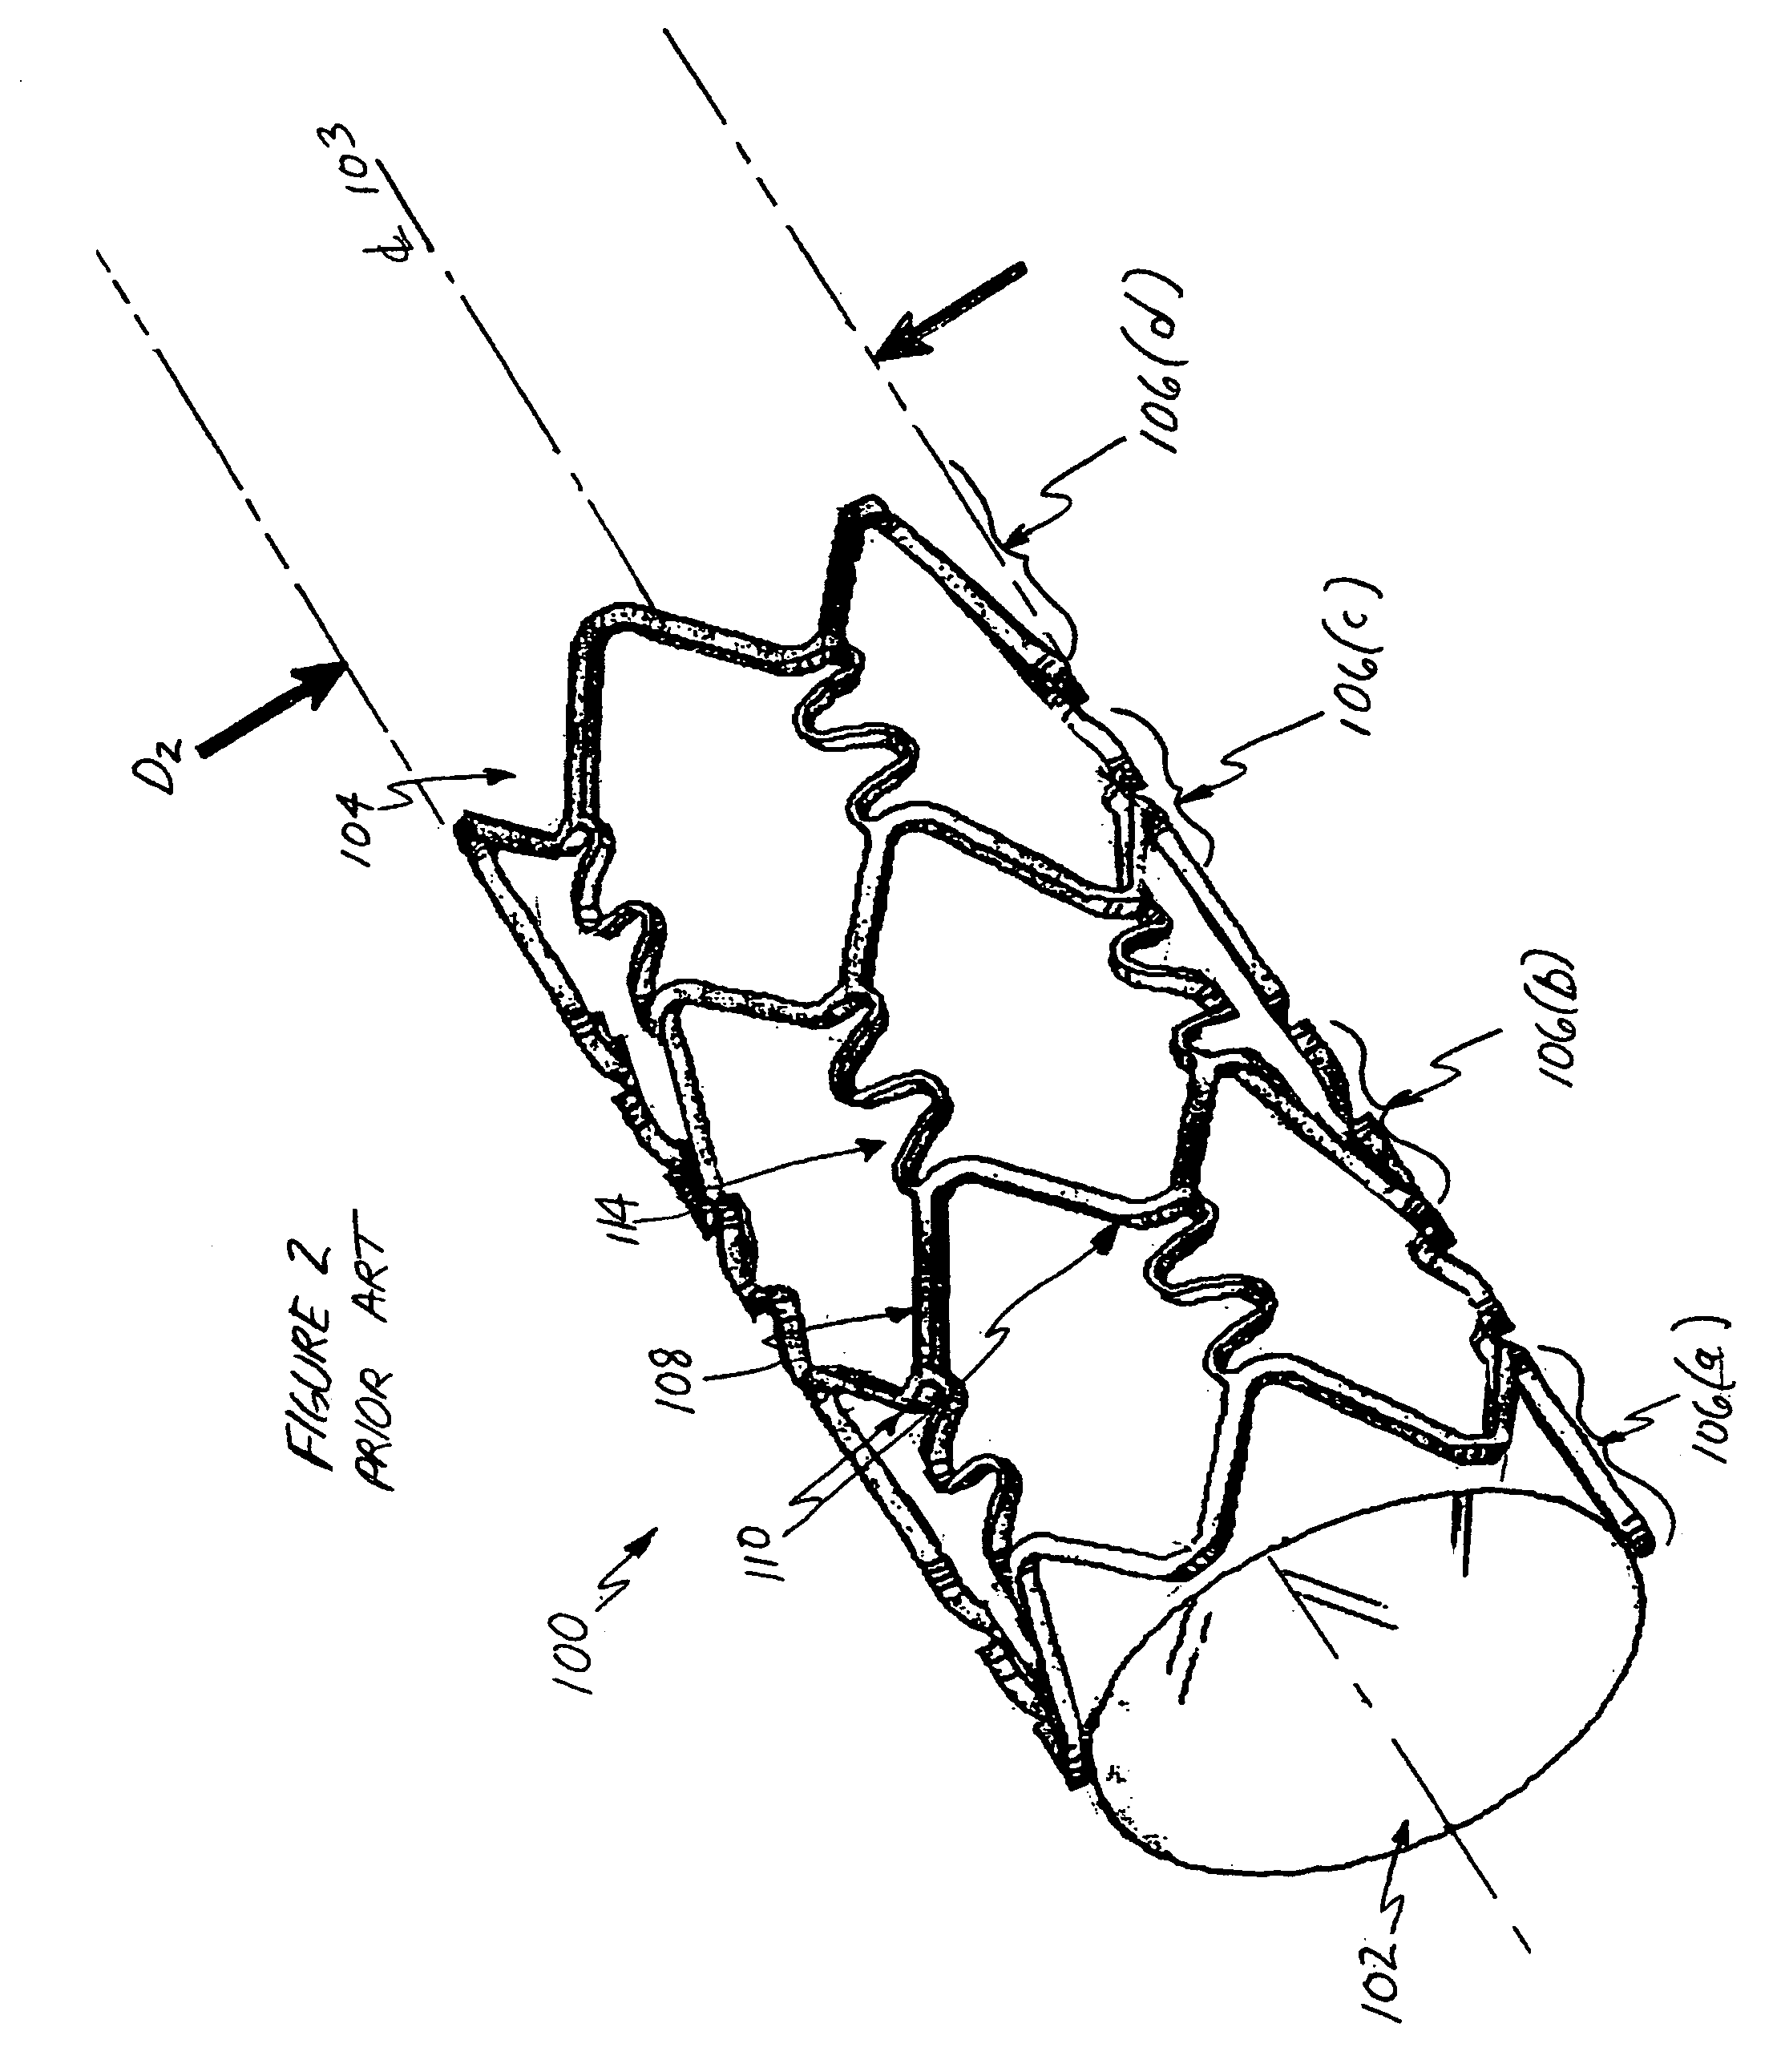 Stent having phased hoop sections